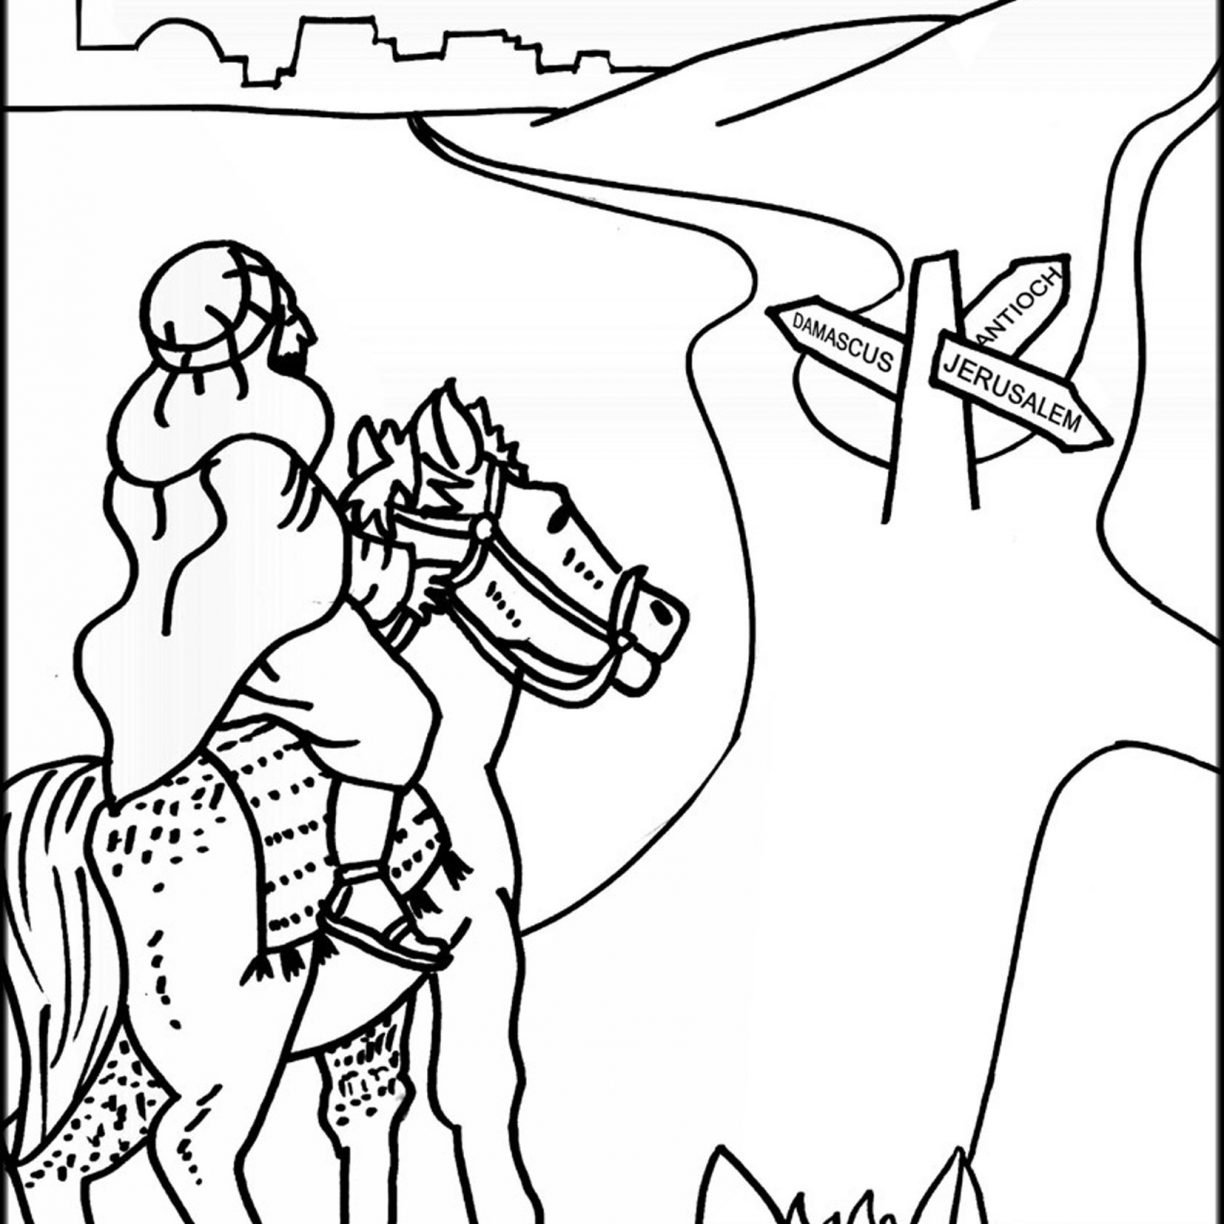 Barnabas Coloring Page The Best Free Barnabas Coloring Page Images Download From 25 Free